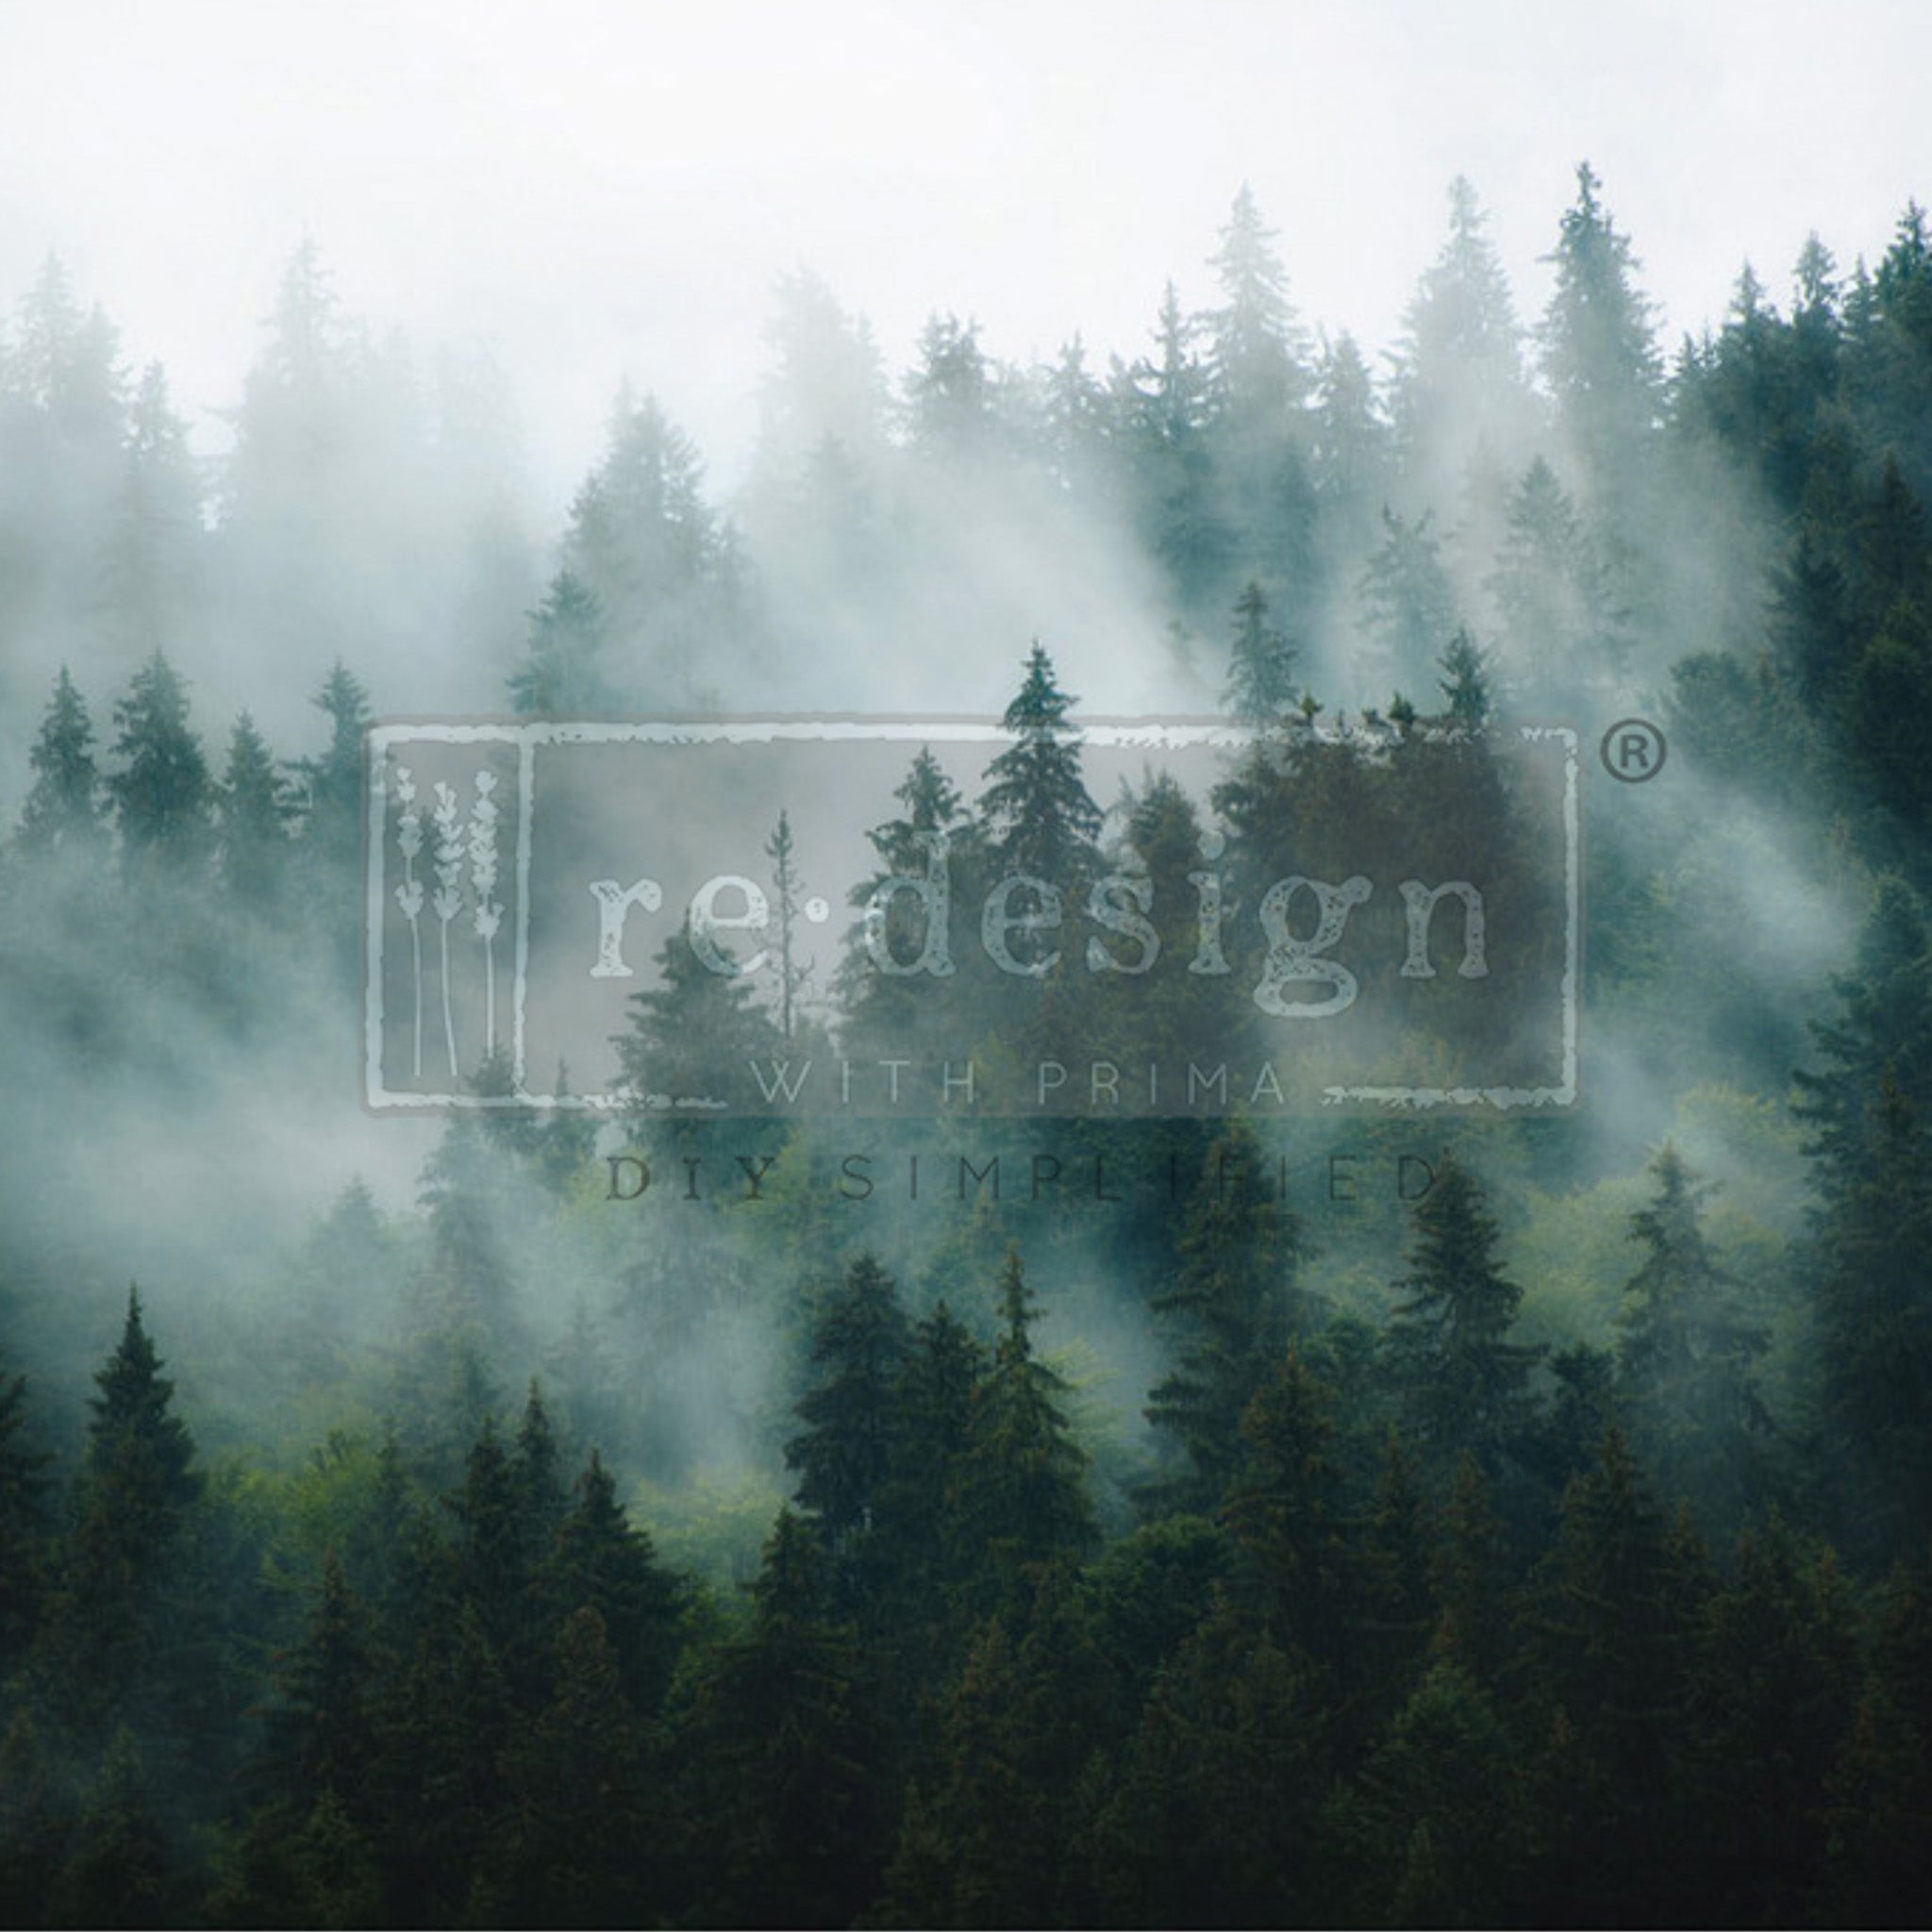 A1 fiber paper design that features an arial view of a misty pine forest.